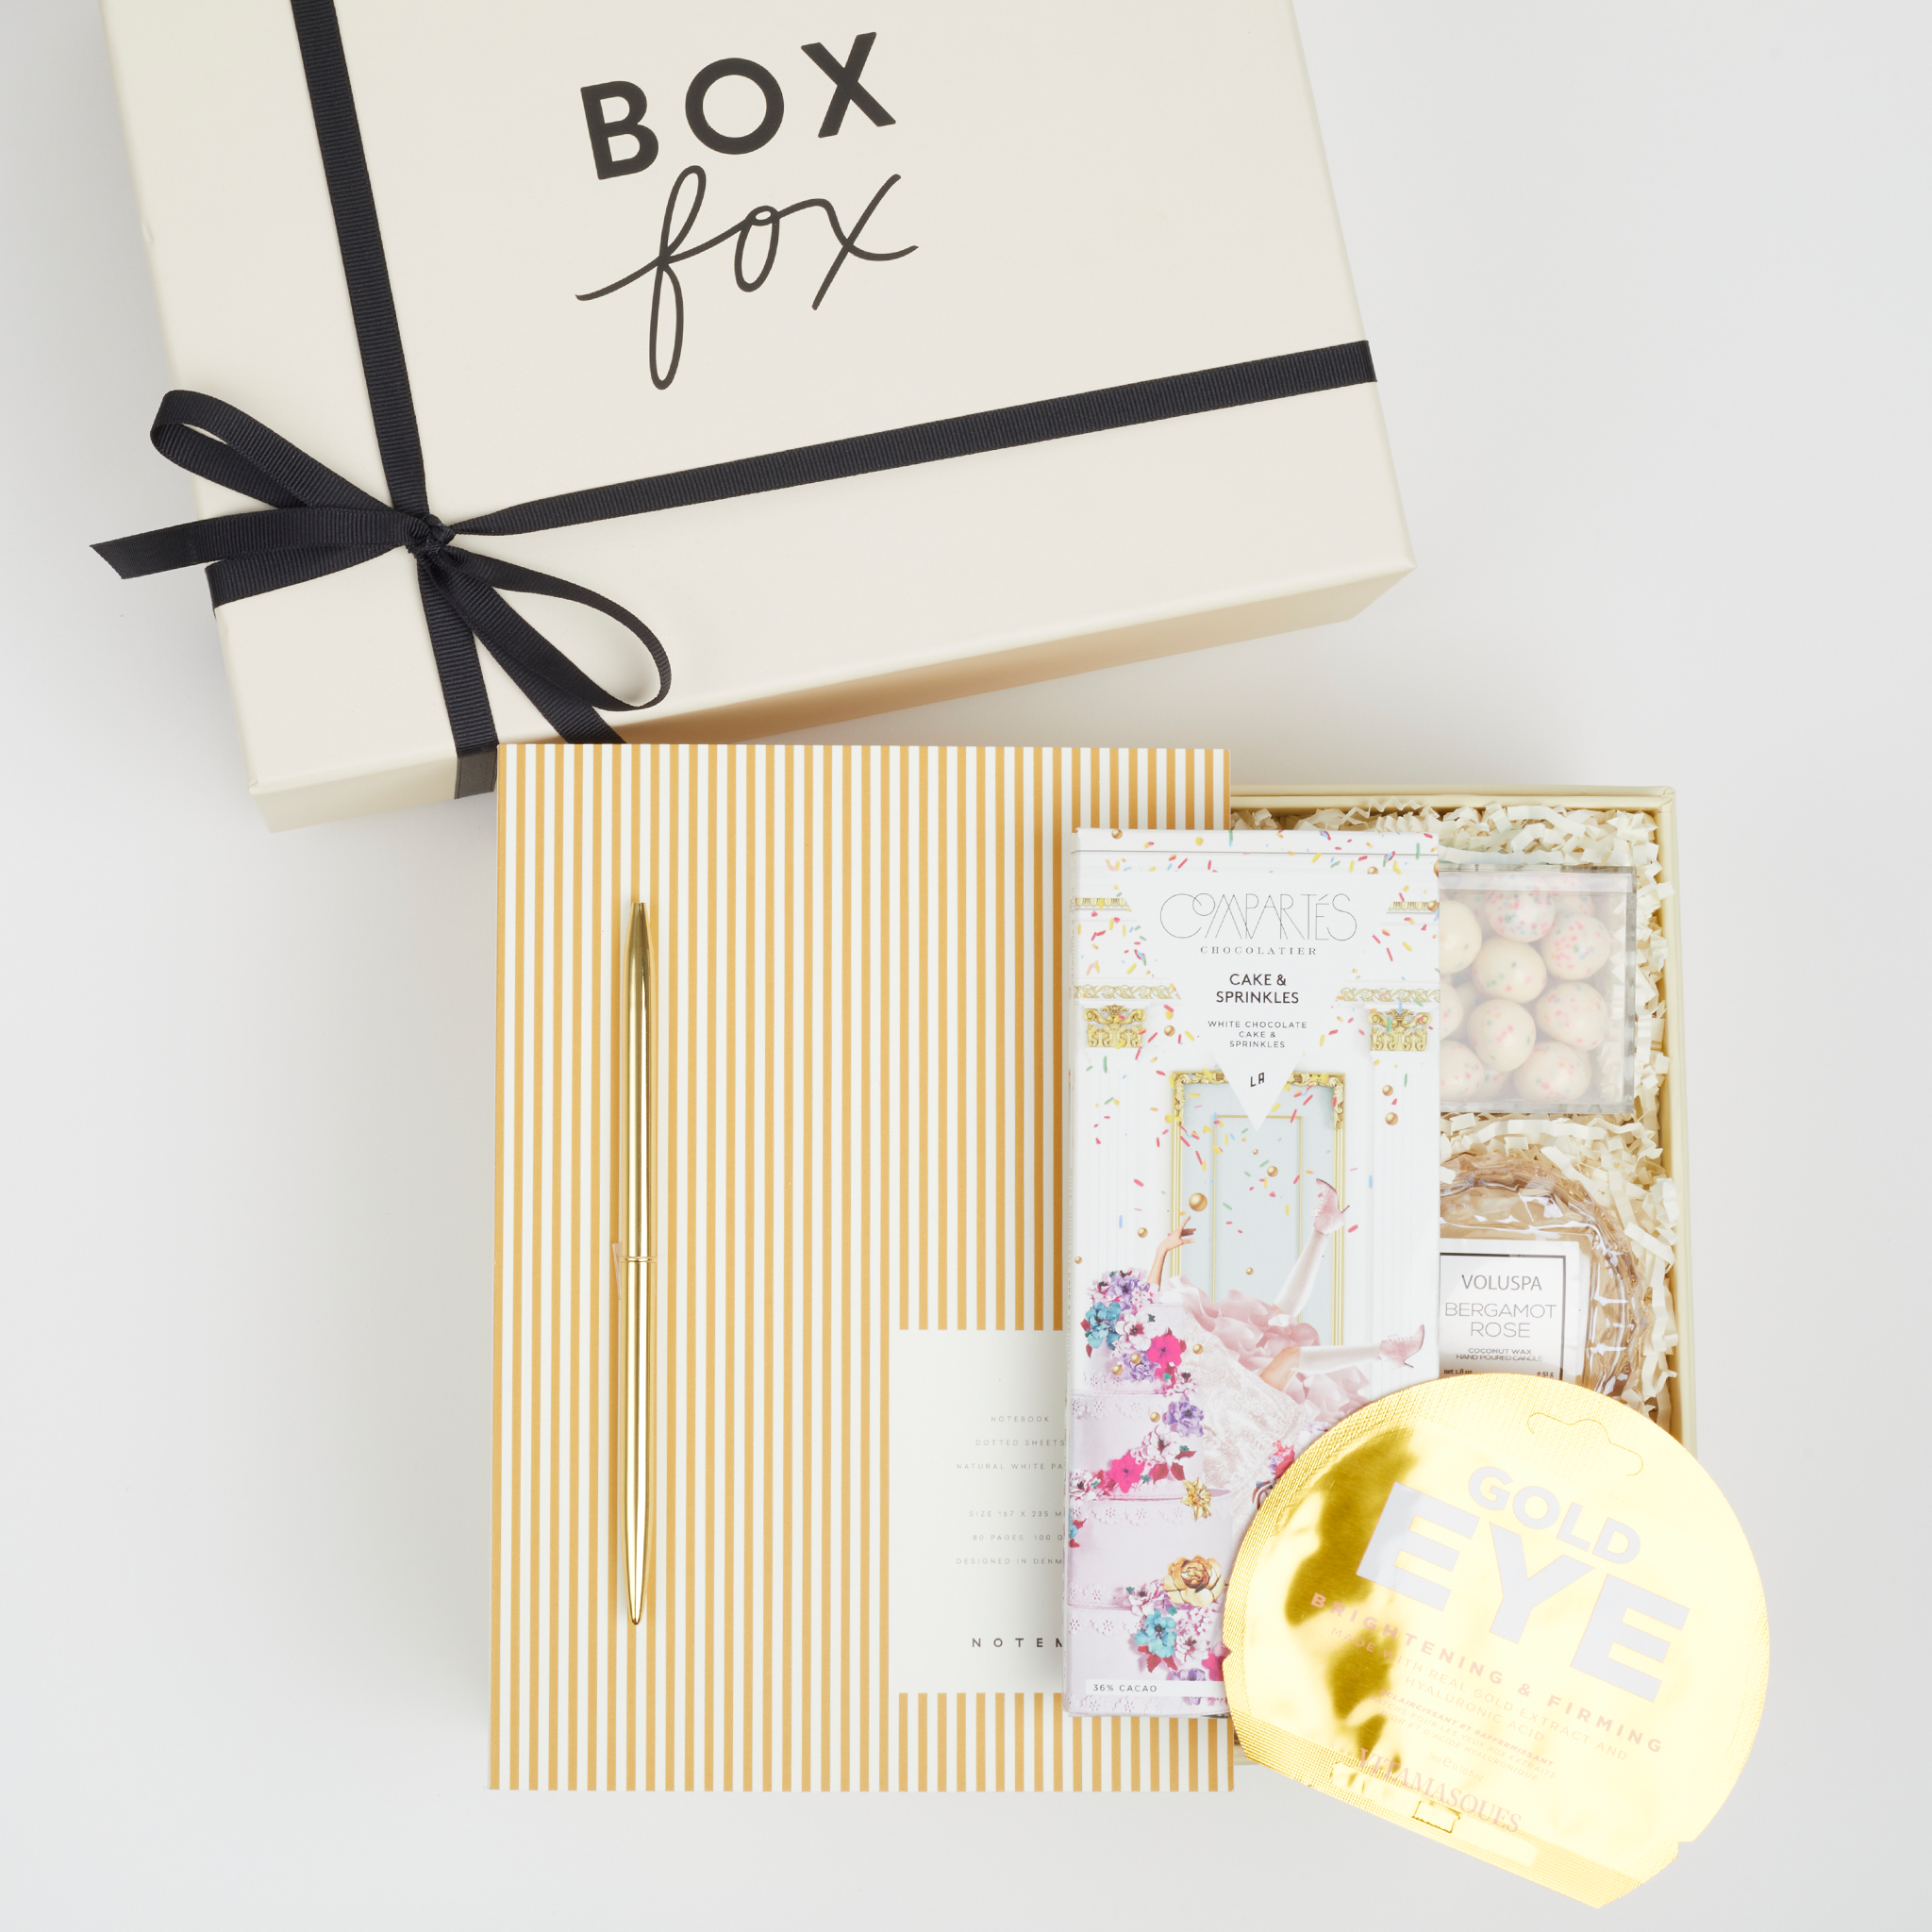 BOXFOX Birthday Gift Box available in Original CremeBOXFOX Birthday Box shown in gift box with ivory crinkle paper